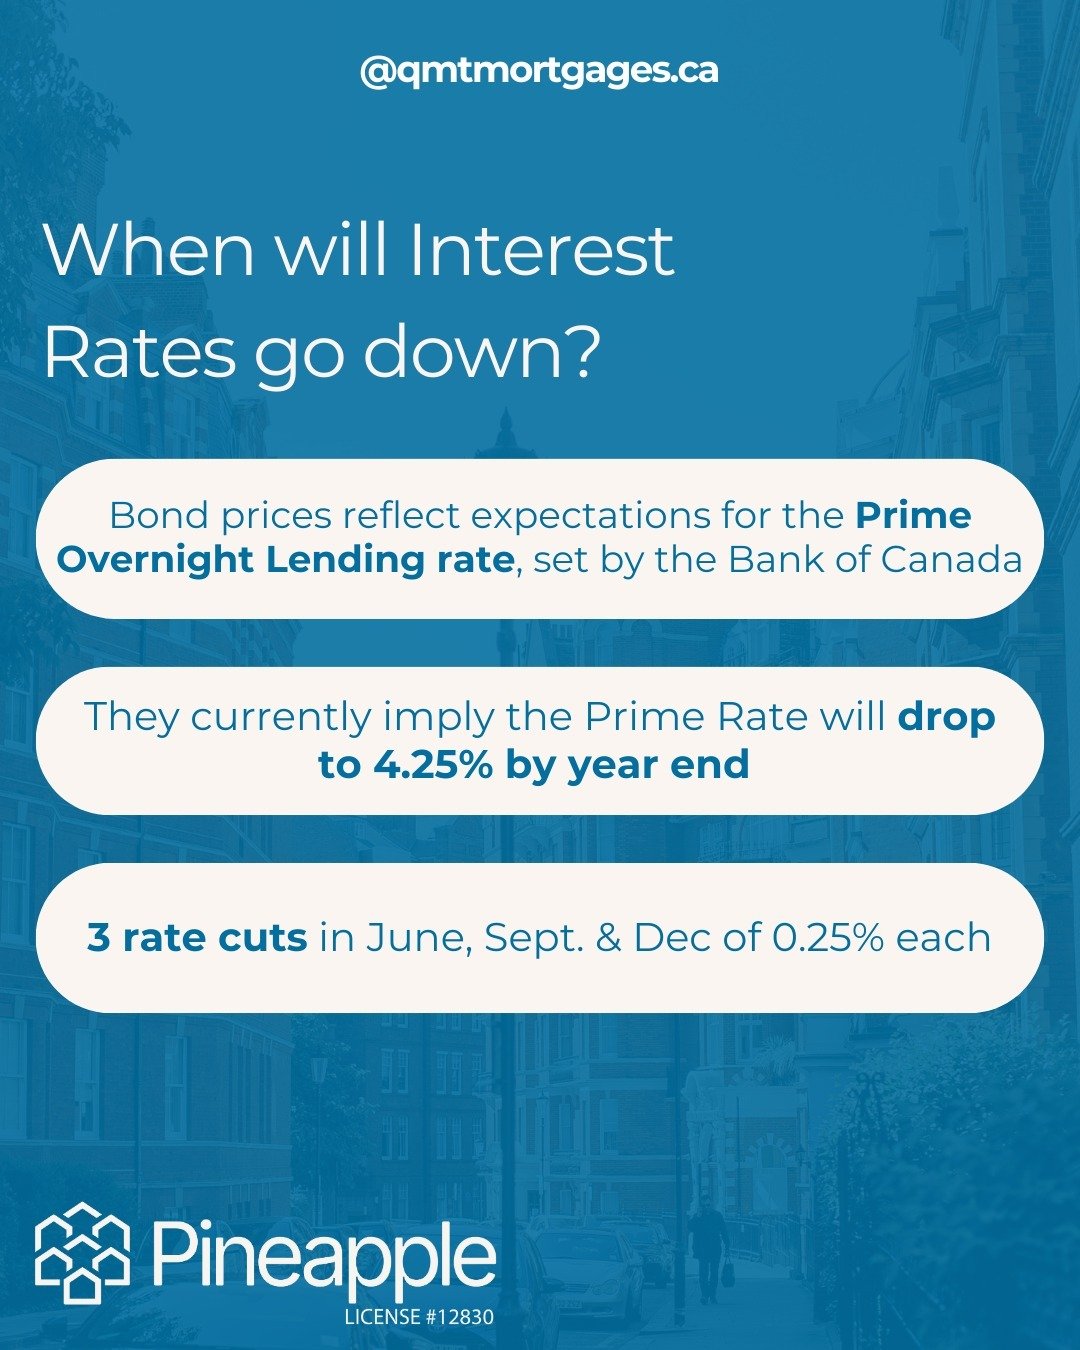 Wondering when interest rates will drop? 🤔 It's the burning question on everyone's mind! While we can't predict the future, we can read the signs from bond markets to gauge sentiment. Got questions about interest rates, affordability, or any other m